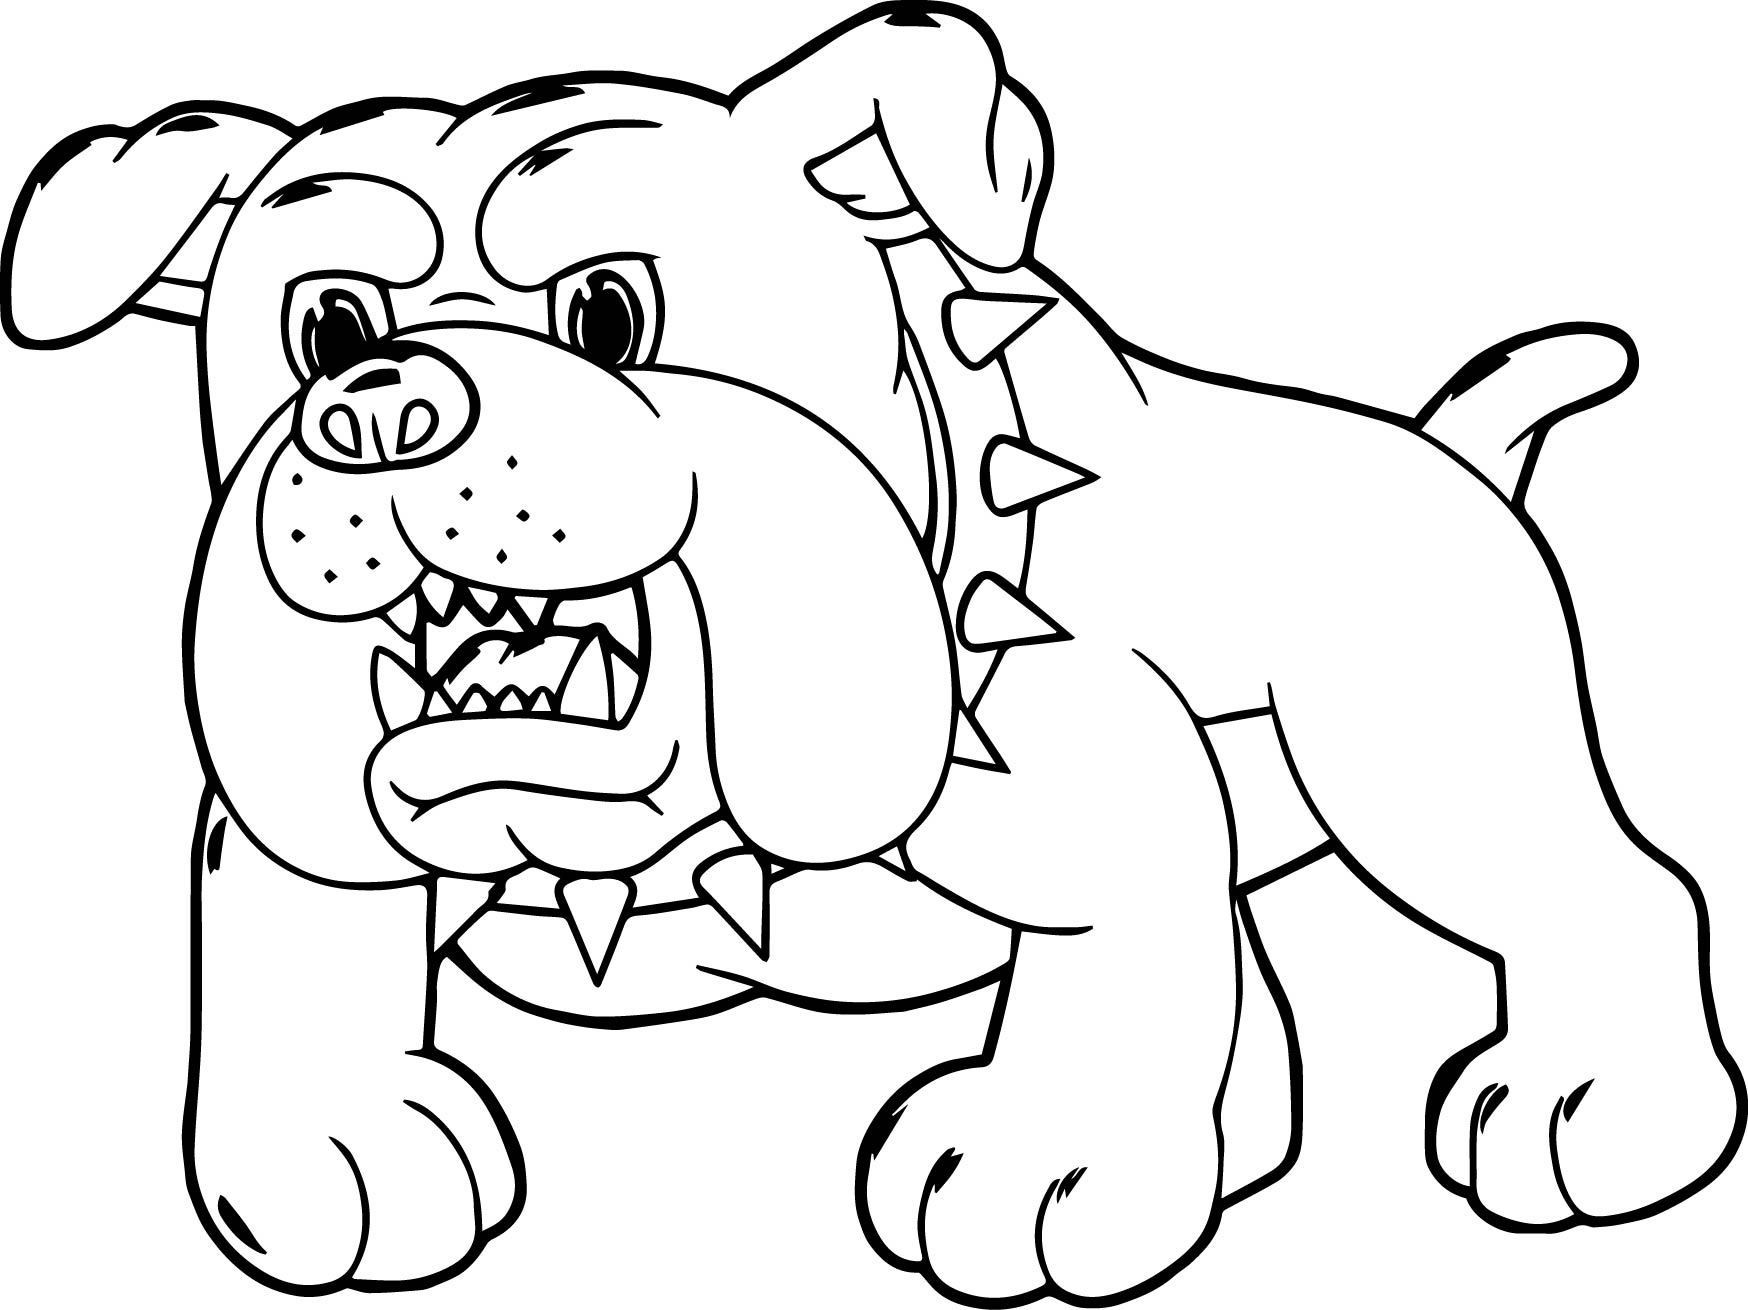 Rottweiler Puppies Coloring Pages Lovely Angry Dog Drawing at Getdrawings Rottweiler Puppies Coloring Pages Best